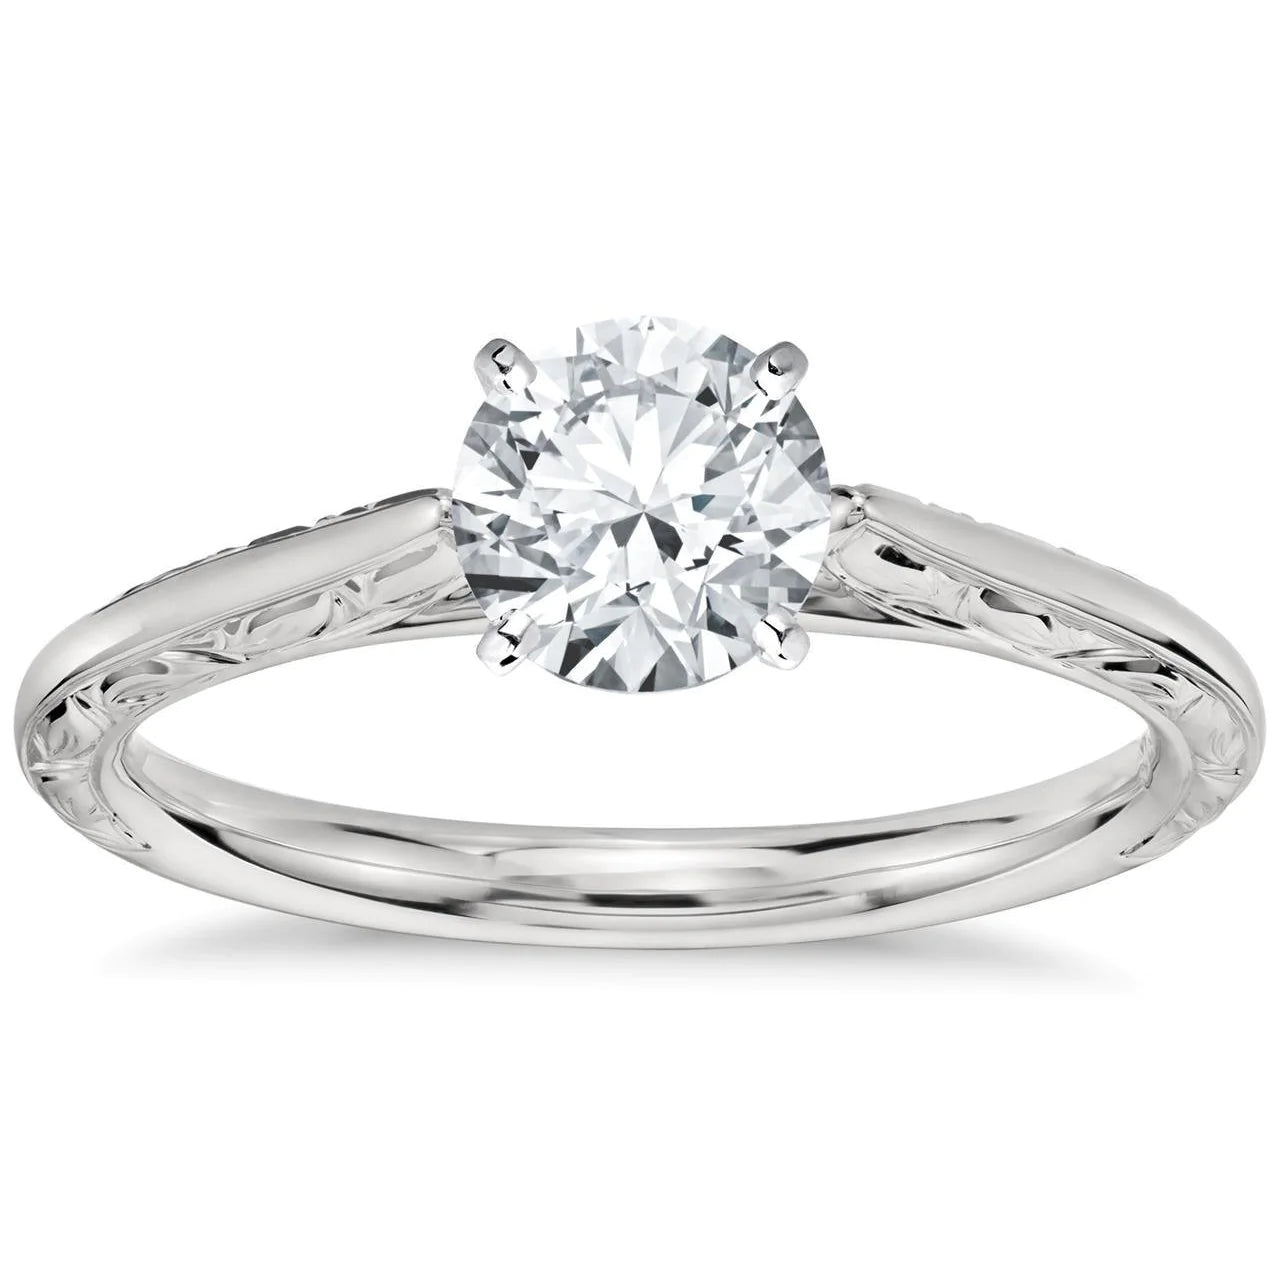 1.50 Carat Big Round Cut Solitaire Real Diamond Engagement Ring